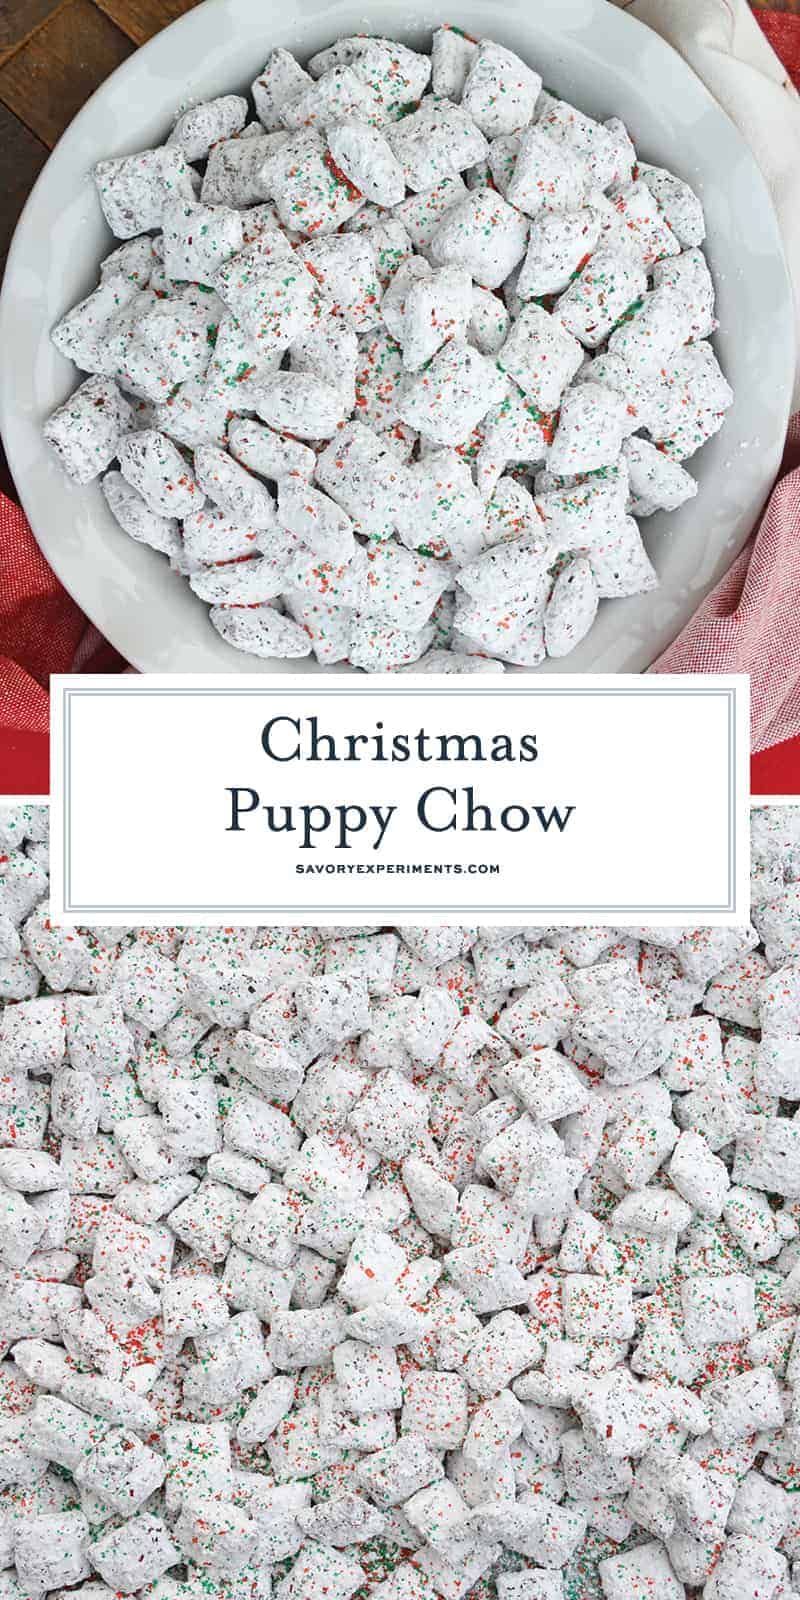 Christmas Puppy Chow transforms a traditional muddy buddy recipe into a festive Reindeer Chow mix! The perfect no-bake dessert for any party or event. #puppychow #reindeerchow #muddybuddy www.savoryexperiments.com 